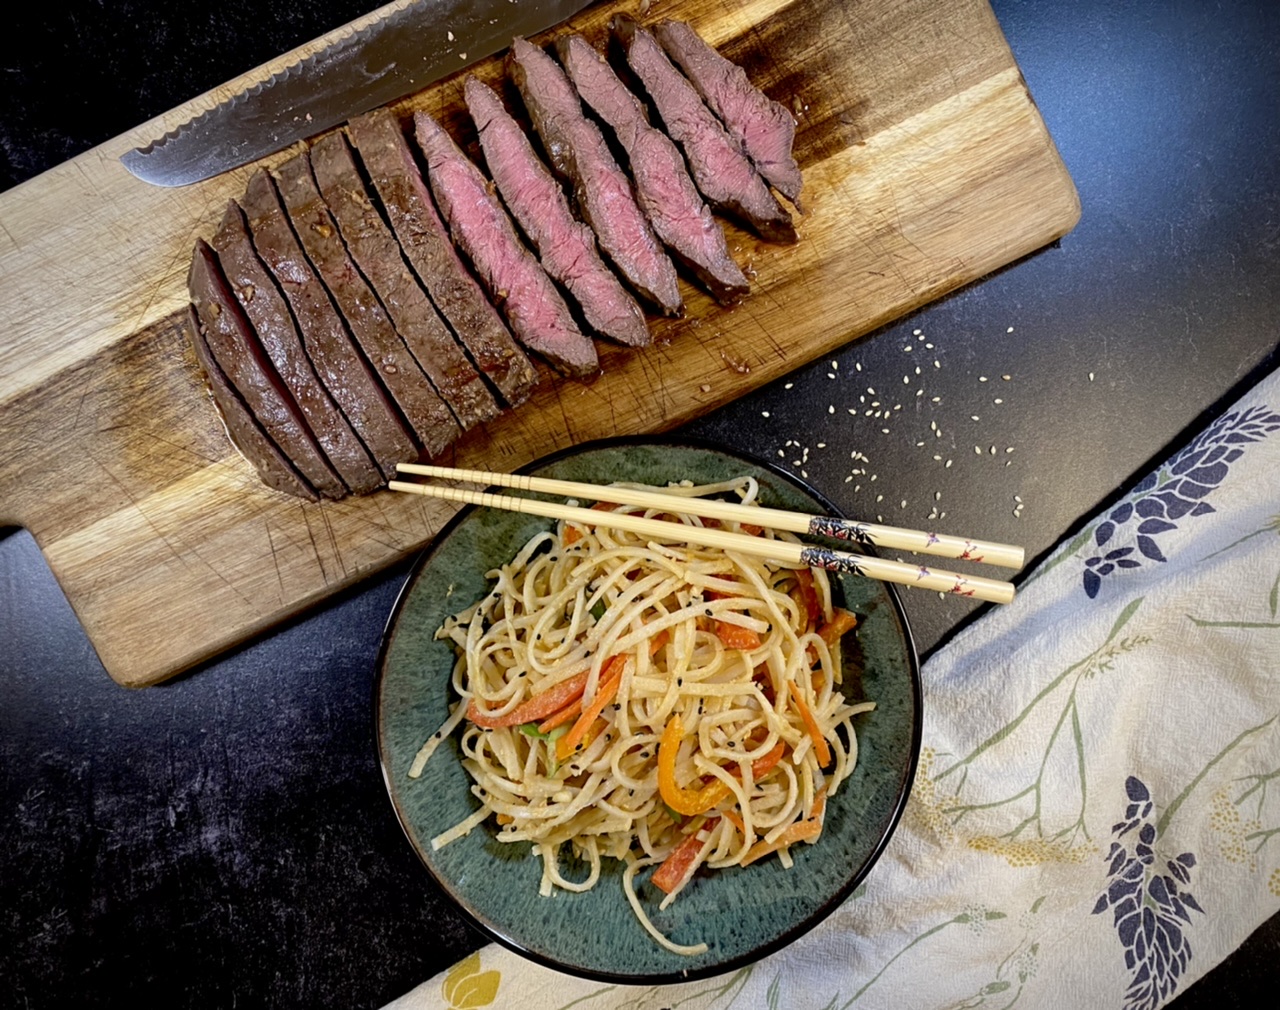 Flatiron steak sliced on a wooden cutting board next to a bowl of peanut noodles